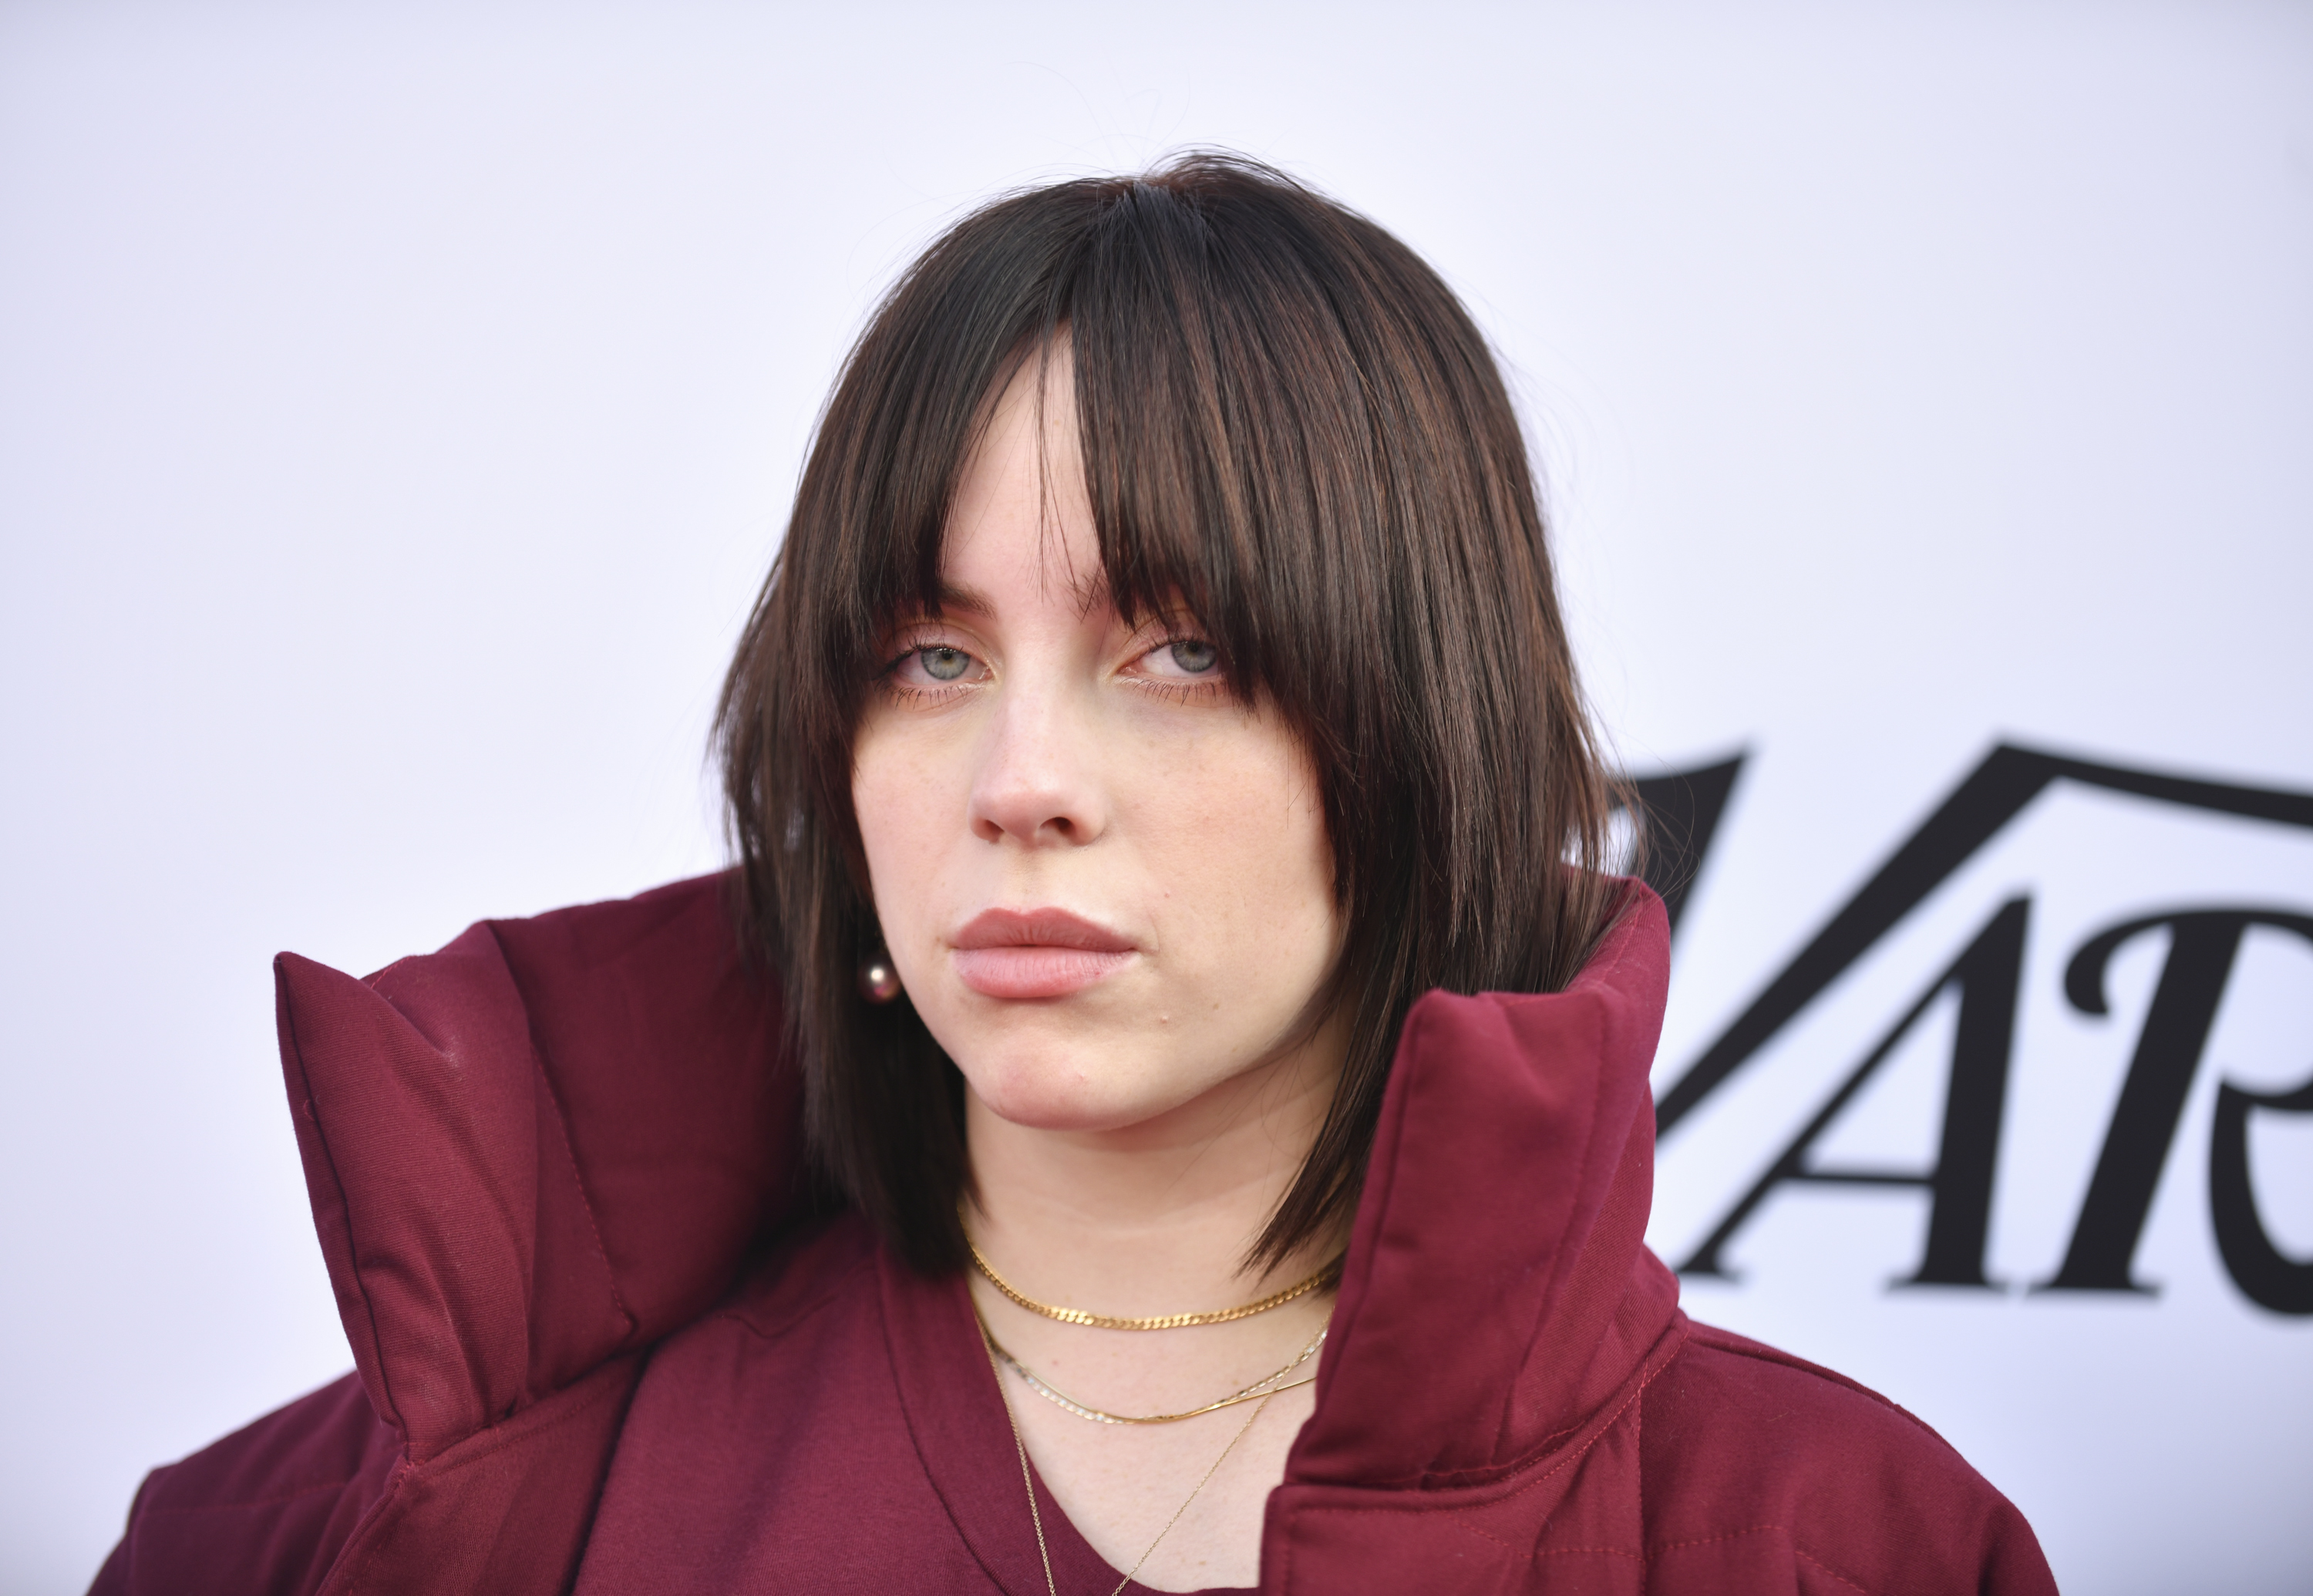 Billie Eilish Wants Restraining Order Against Stalker Who Causes “Fear & Anxiety”